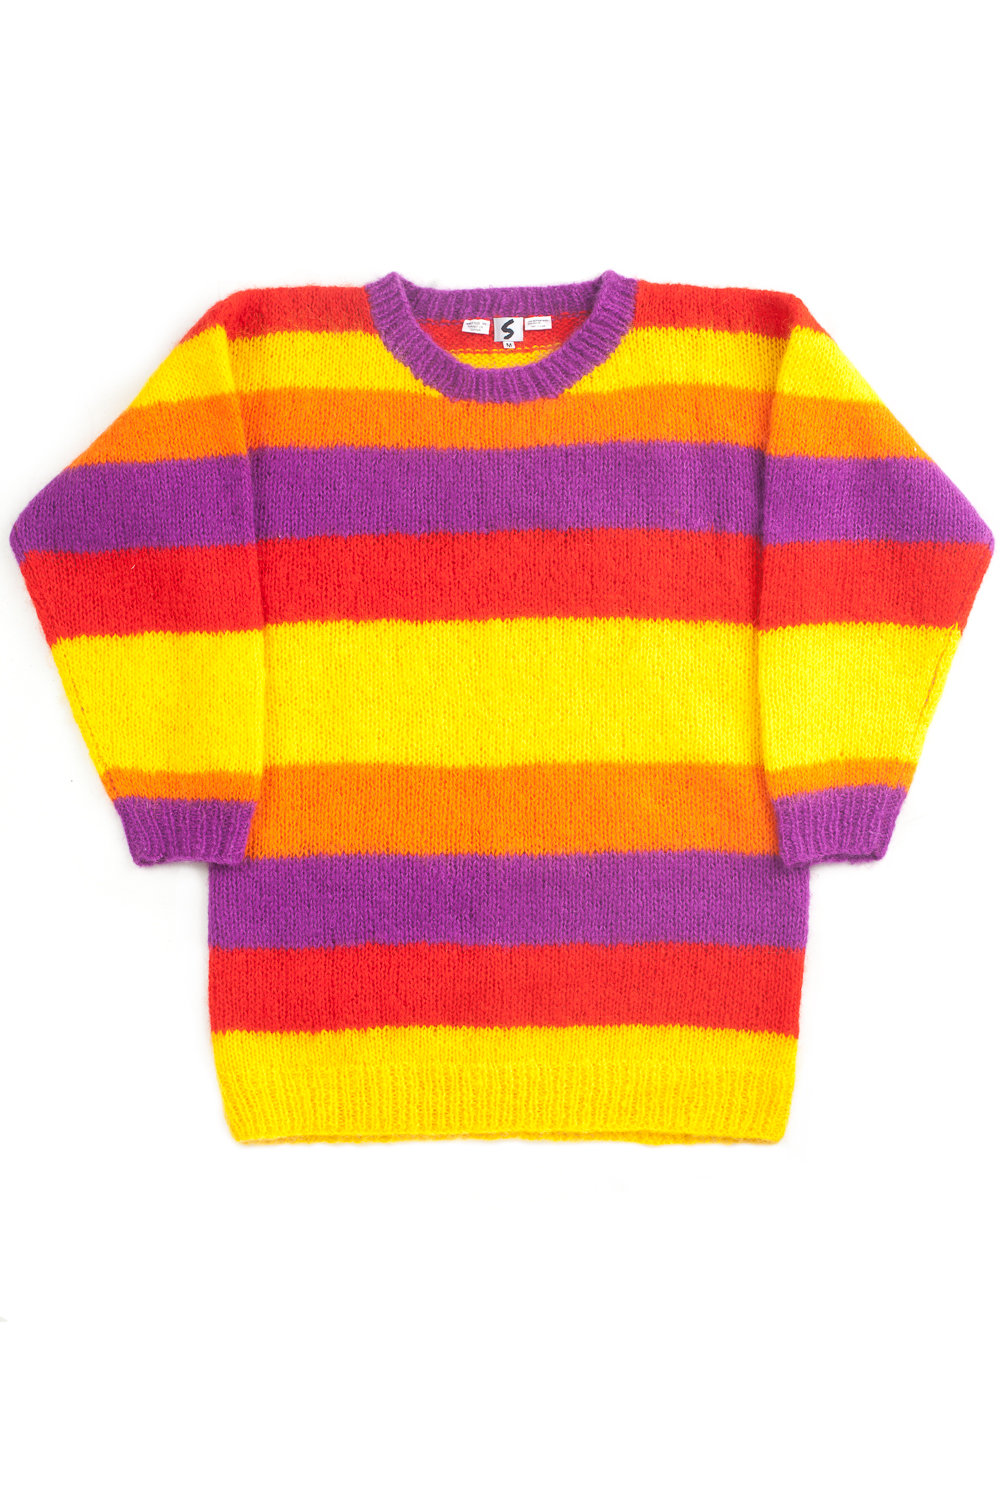 Stephen Sprouse Authenticated Wool Knitwear